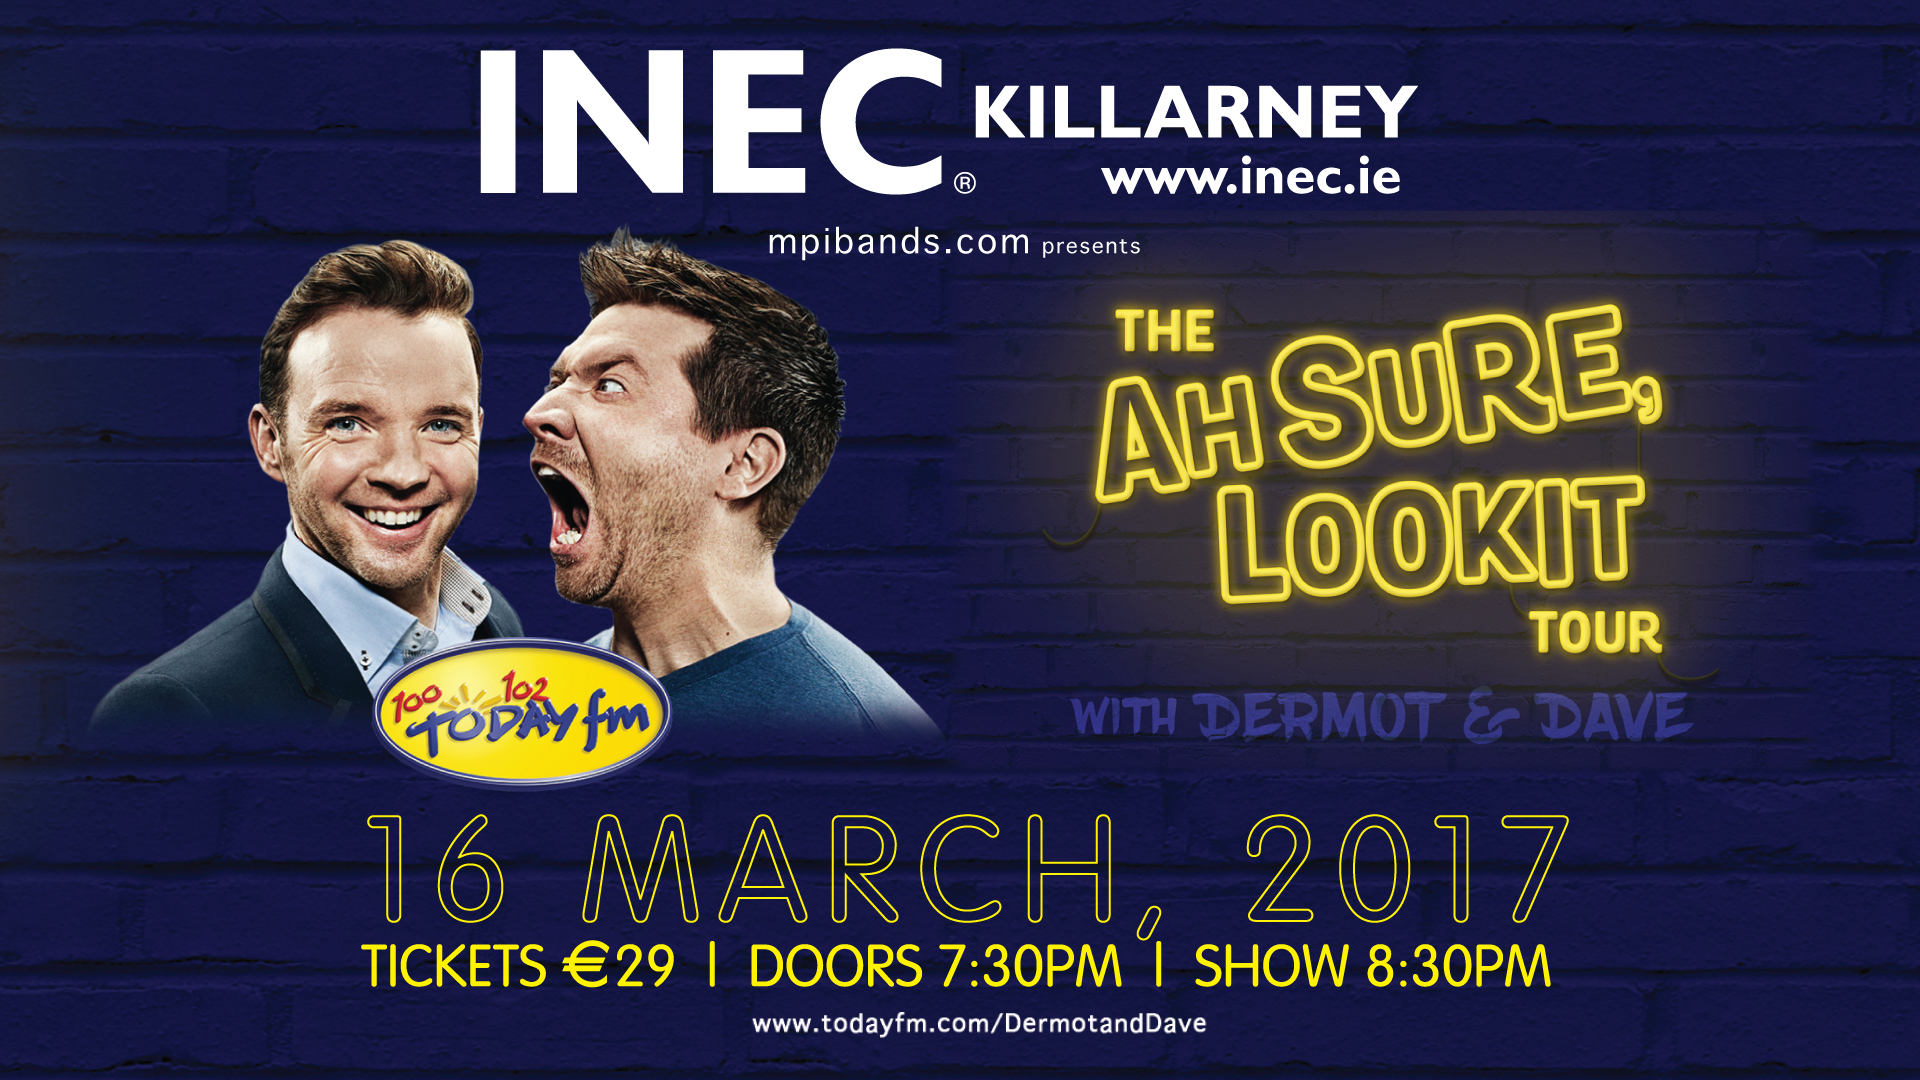 Dermot & Dave Ah Sure look it tour comes to the INEC Killarney,